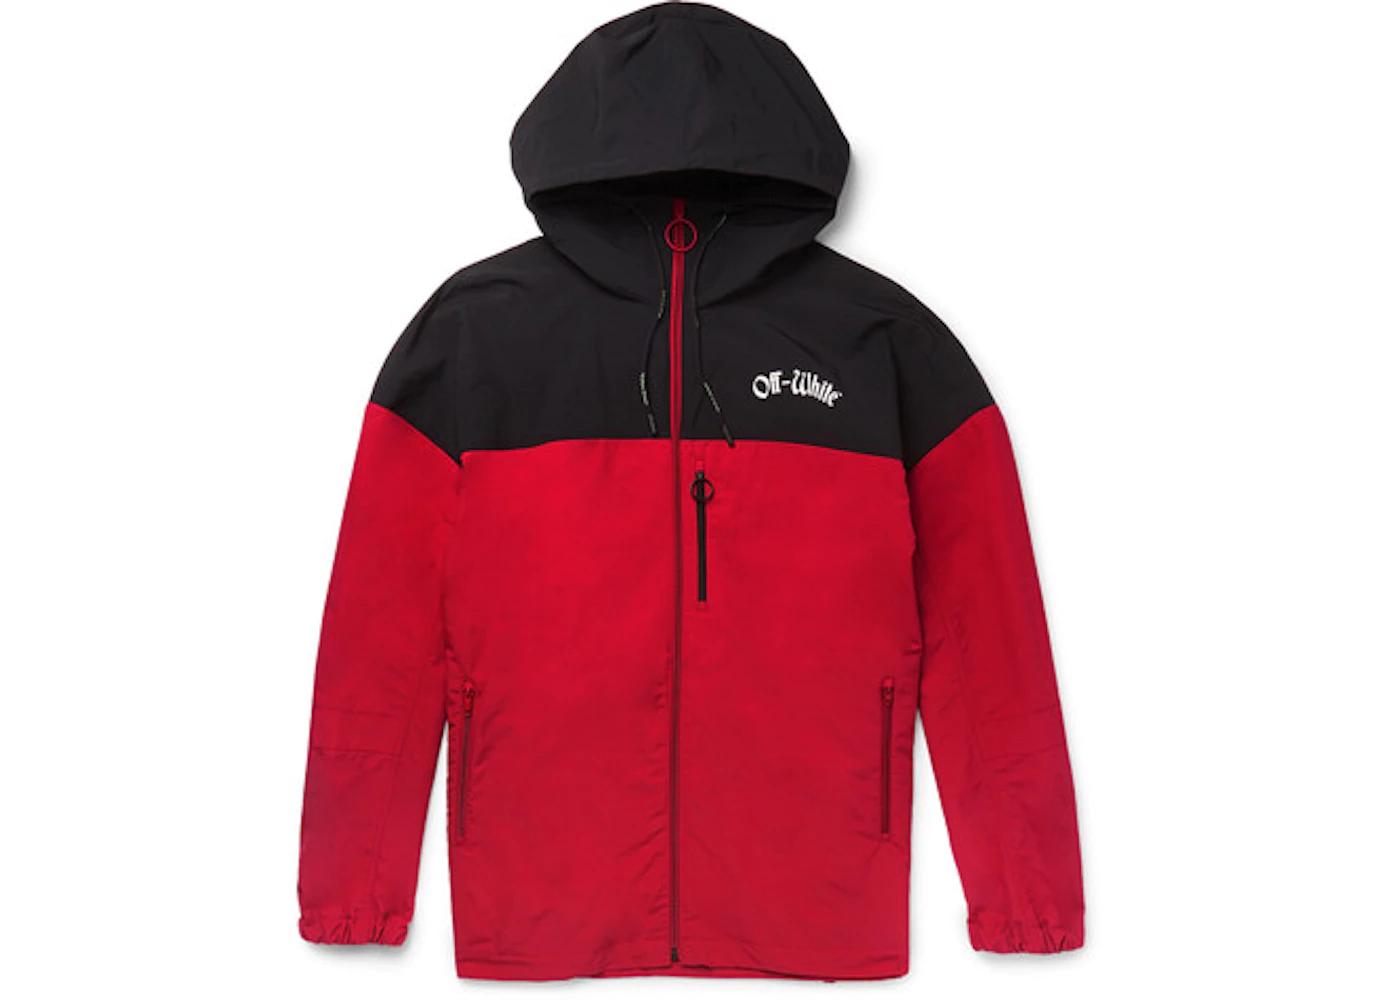 OFF-WHITE Oversized Two-Tone Shell Hooded Jacket Red/Black/White by OFF-WHITE